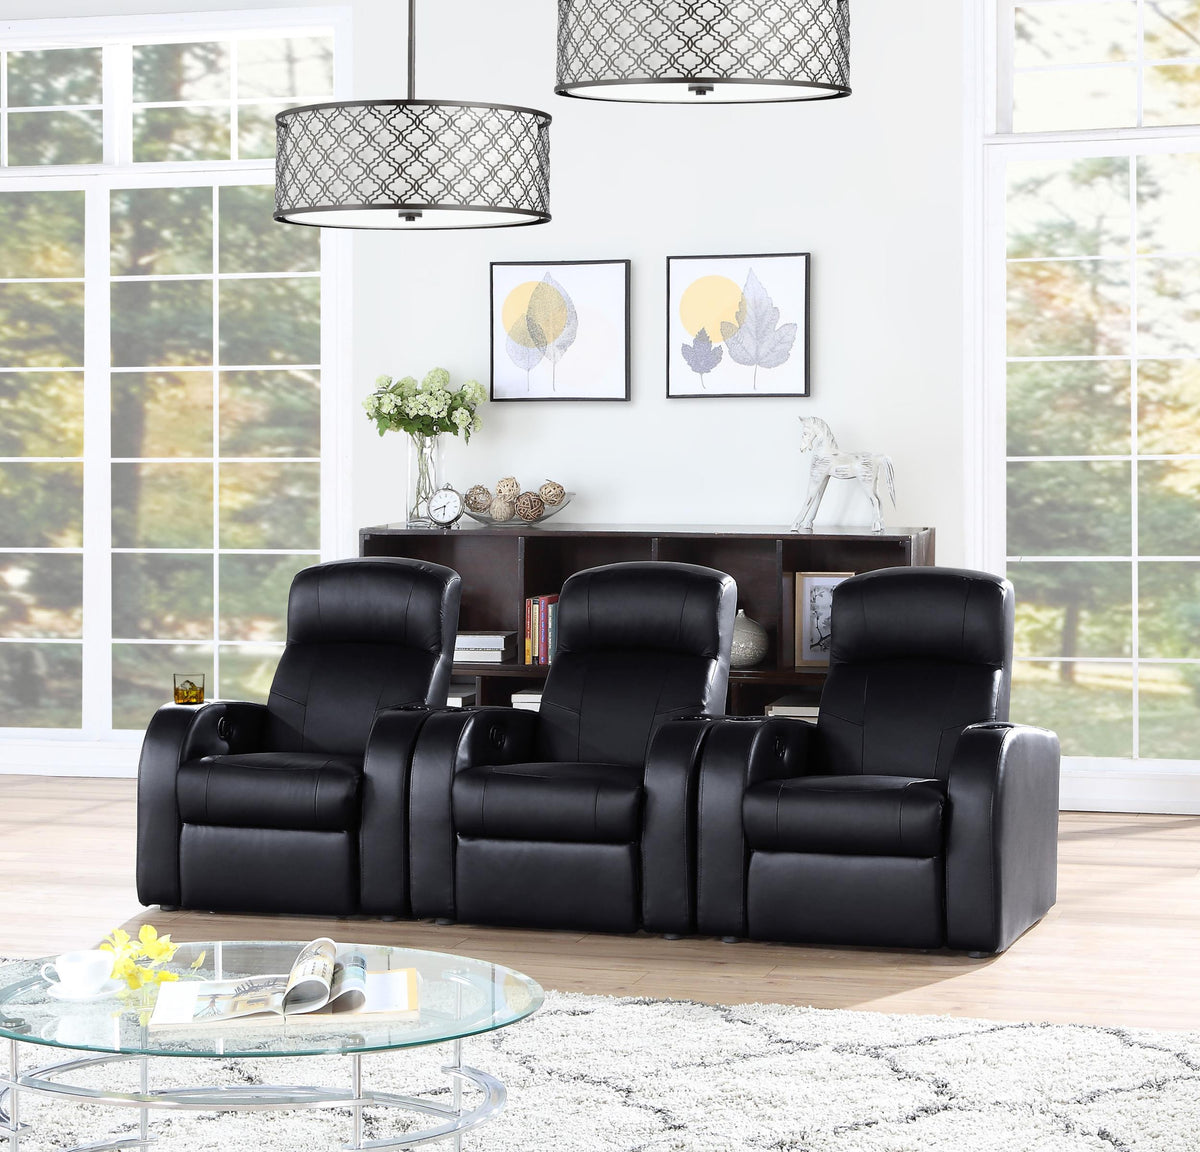 Cyrus Upholstered Recliner Home Theater Set - Half Price Furniture